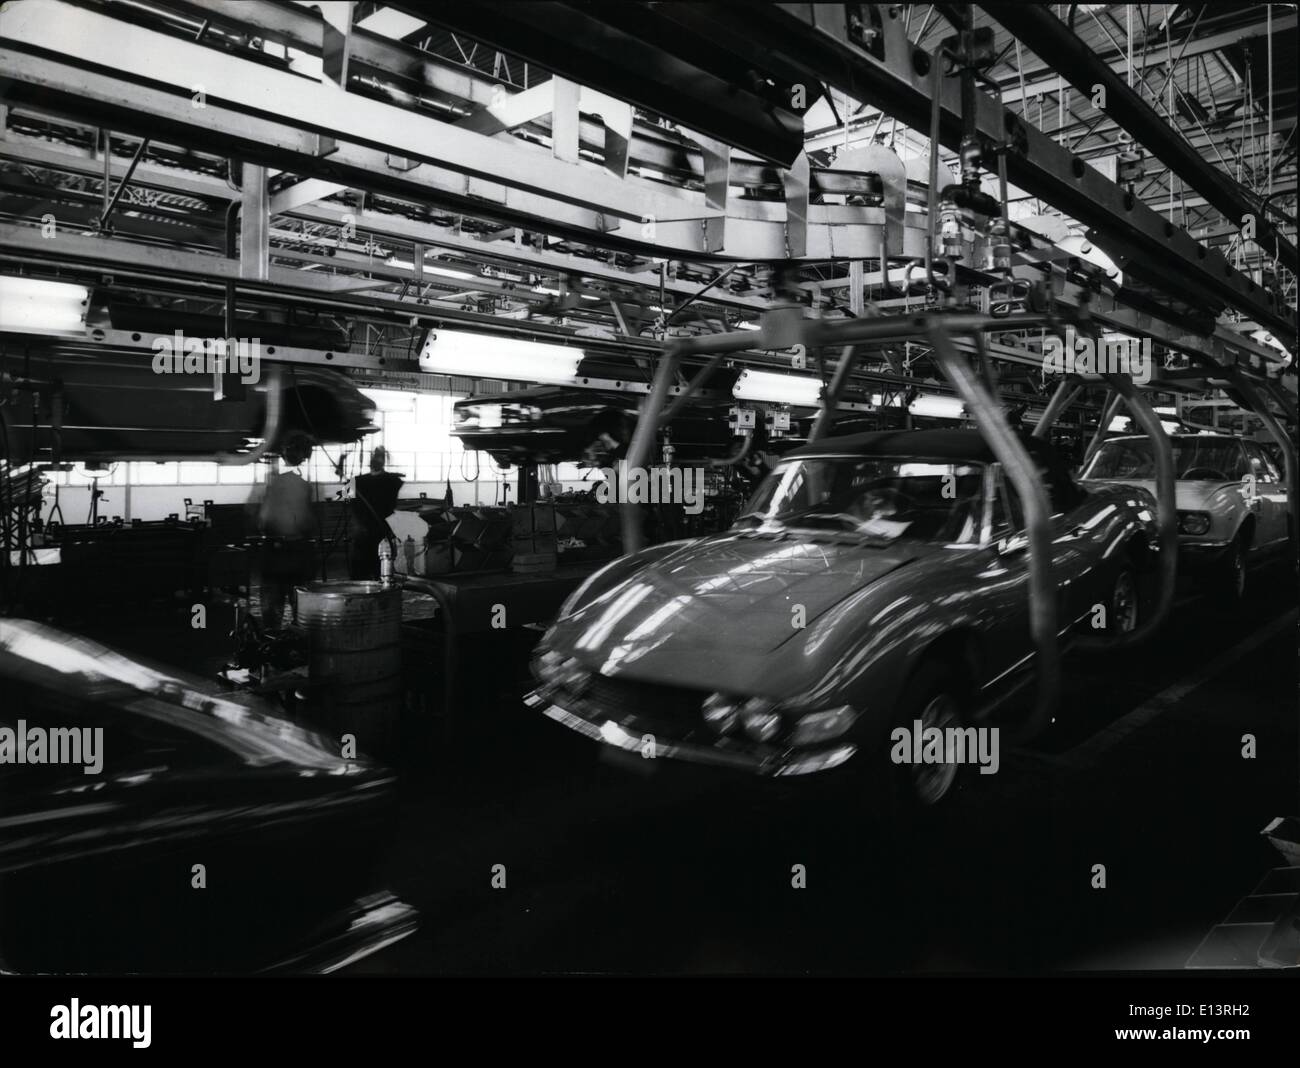 Mar. 27, 2012 - Fiat car plant, Rivalta, Turin province; Final stage assembly line Fiat Dino Spider. Stock Photo